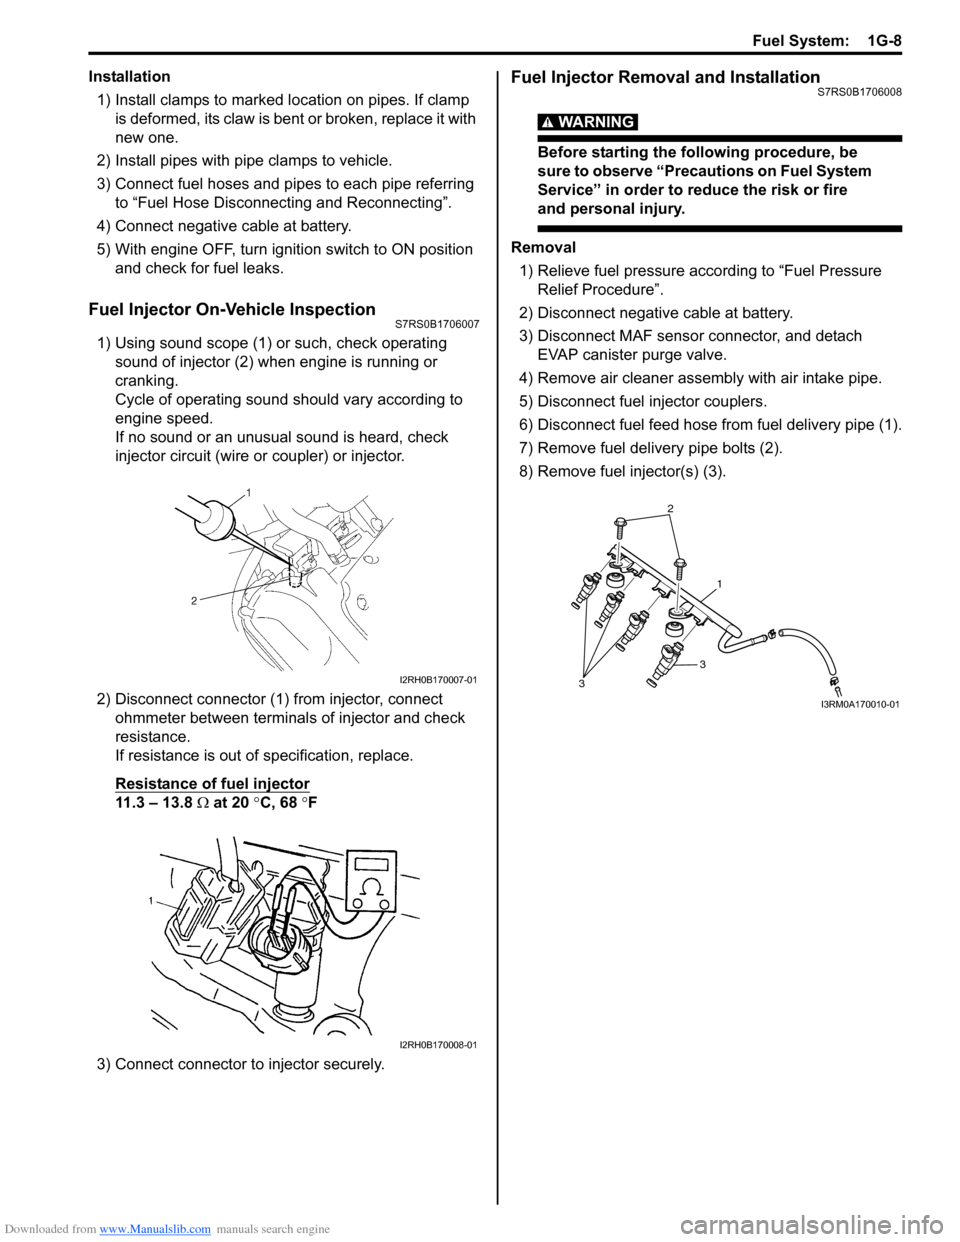 SUZUKI SWIFT 2008 2.G Service Workshop Manual Downloaded from www.Manualslib.com manuals search engine Fuel System:  1G-8
Installation1) Install clamps to marked location on pipes. If clamp  is deformed, its claw is bent  or broken, replace it wi